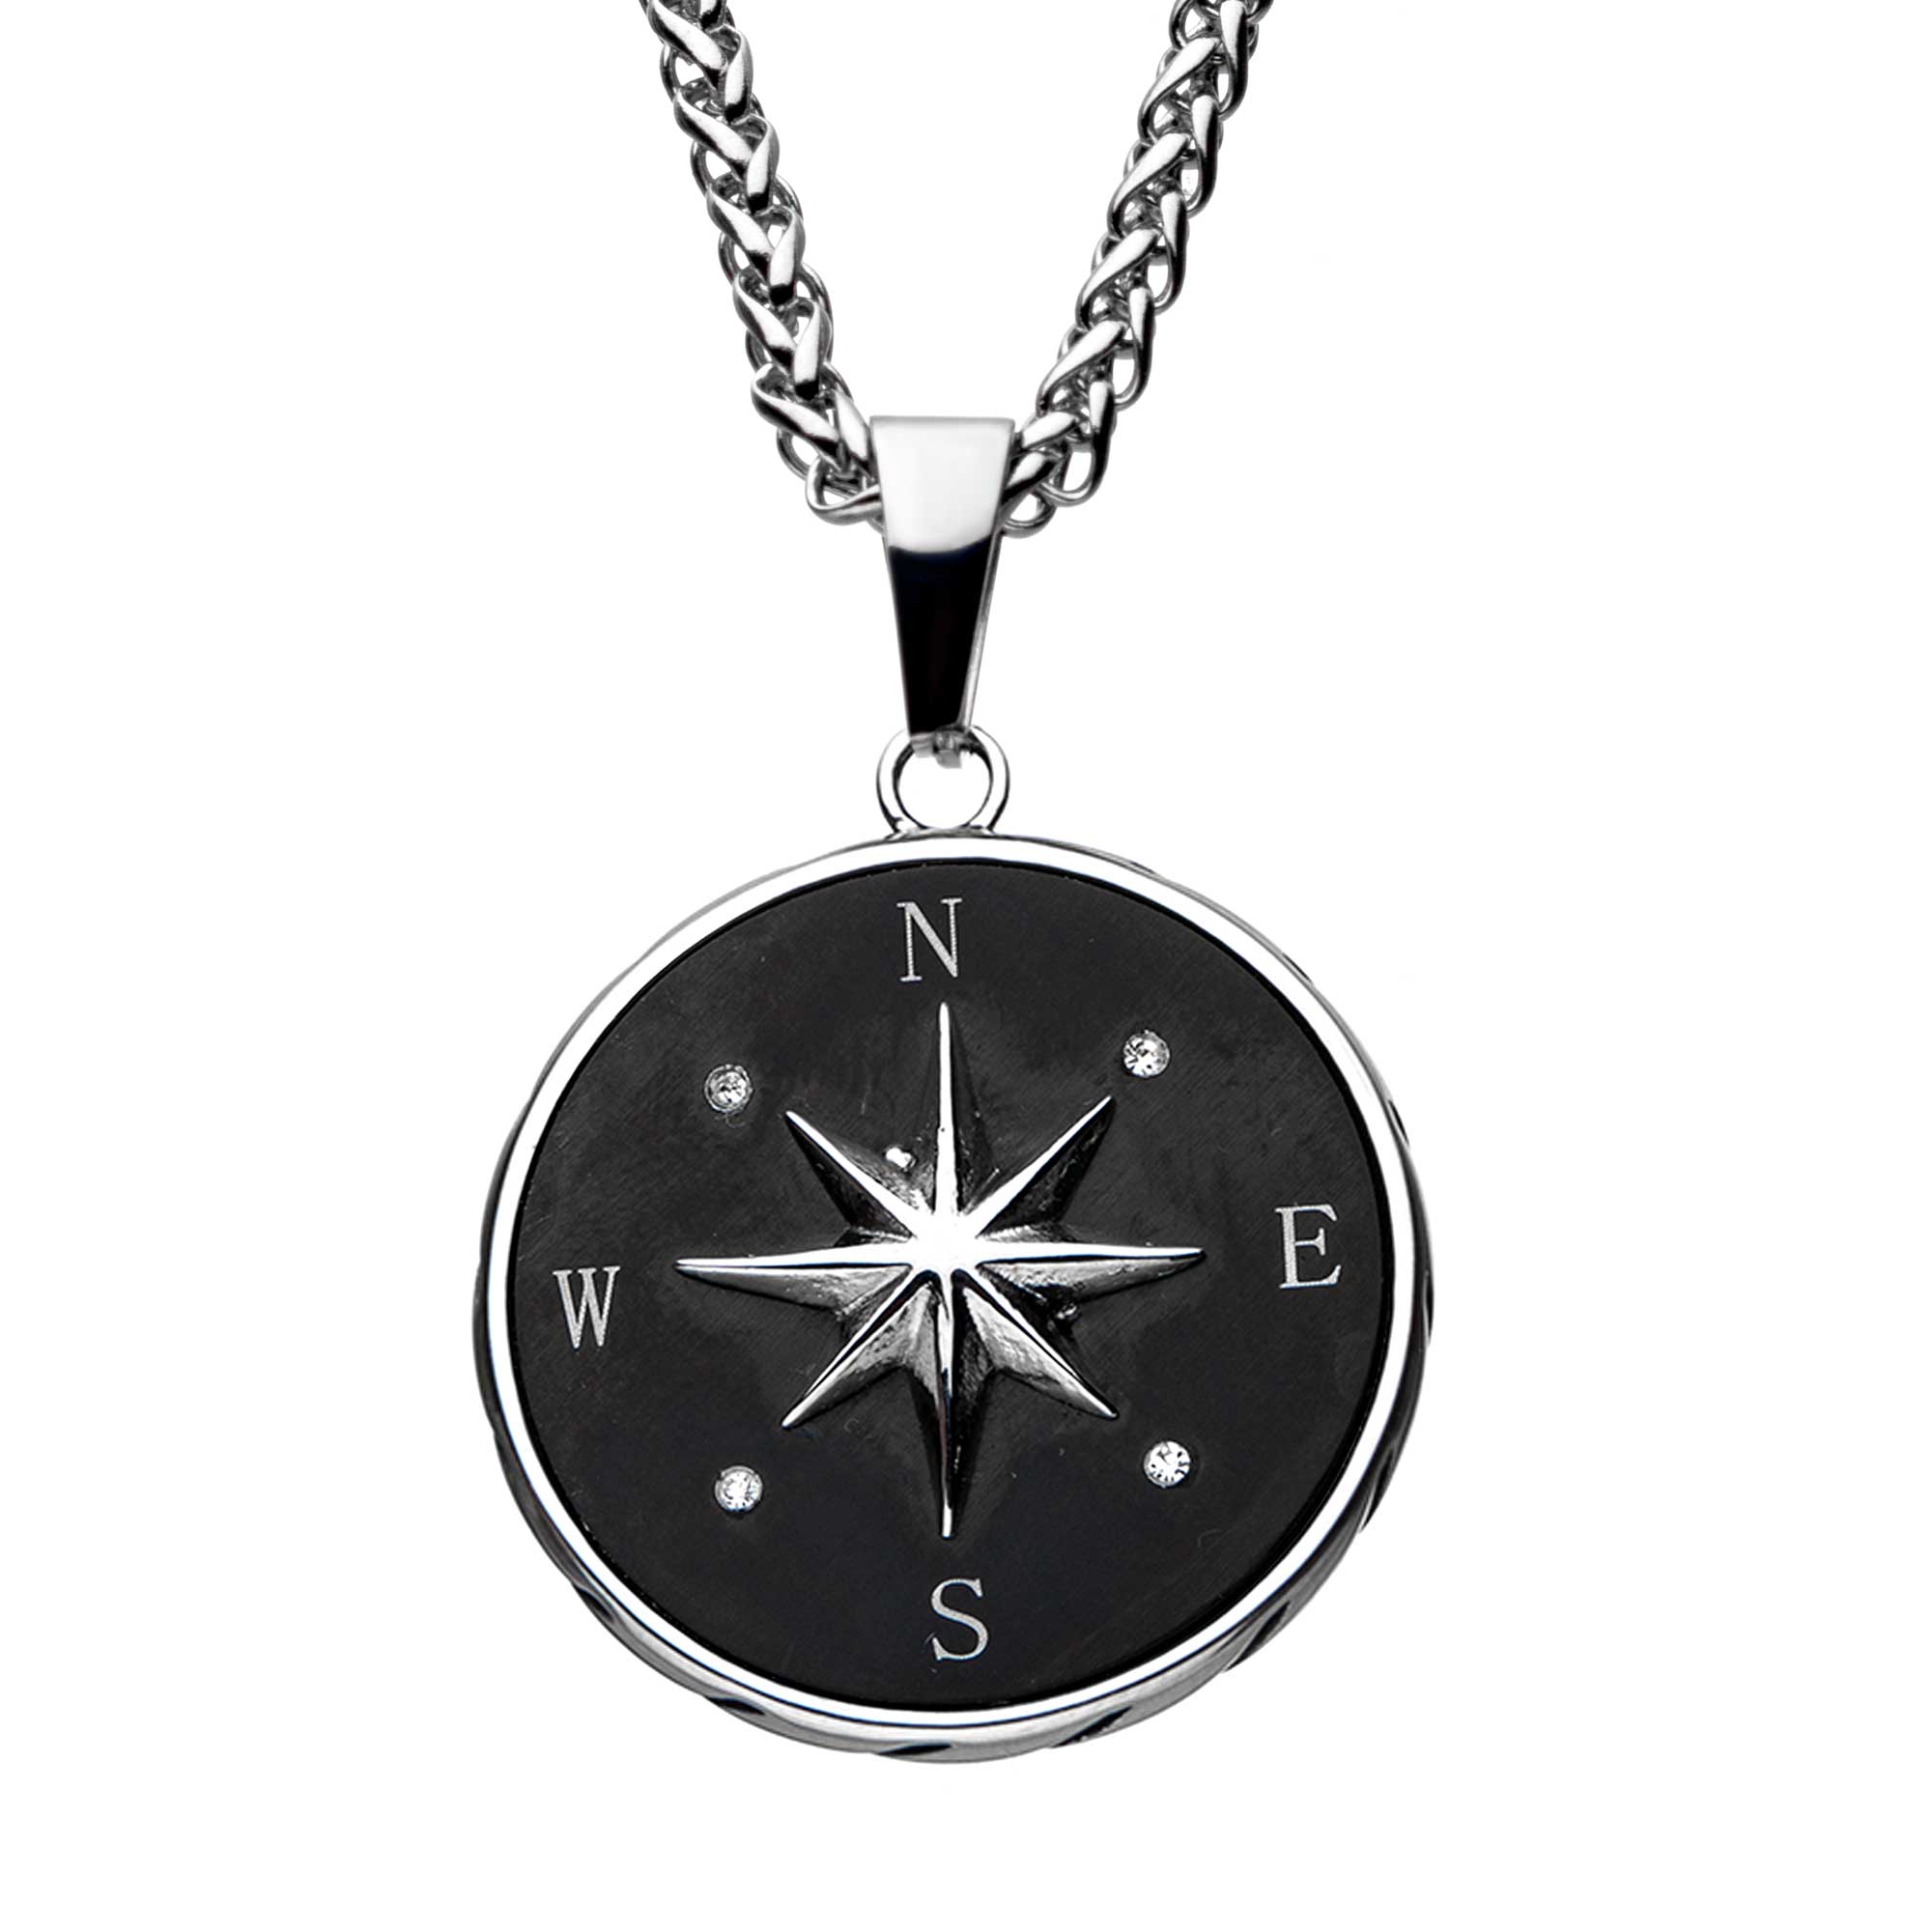 Stainless Steel and Black Plated Compass Pendant with Chain Mitchell's Jewelry Norman, OK